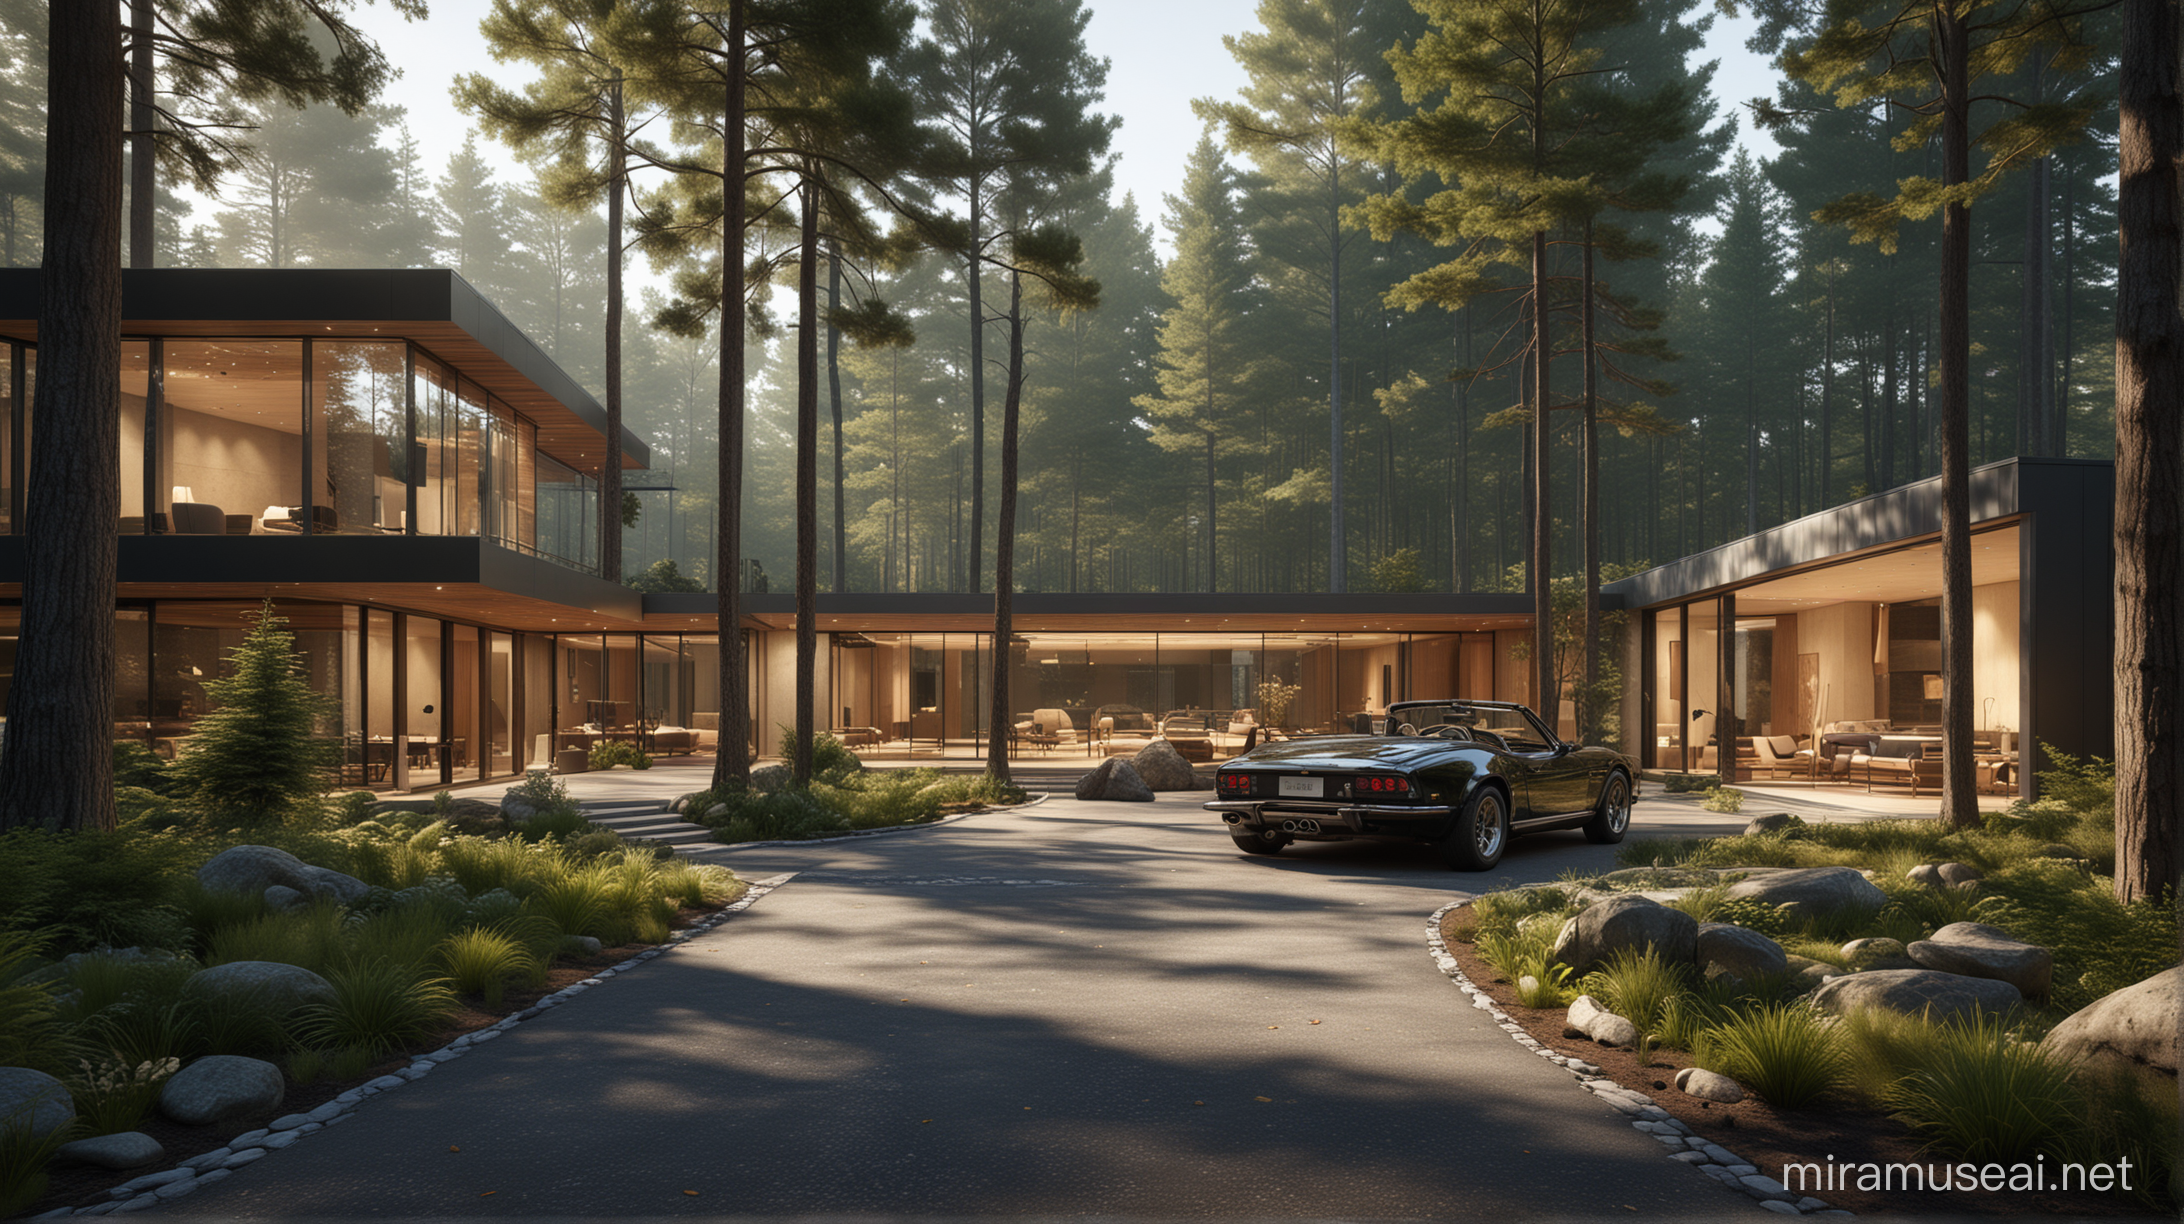 "Compose a luxurious residential scene set in a serene forest environment during the late afternoon when the sunlight gently filters through the trees. The architecture should be a blend of modern design with natural elements, featuring clean lines, large glass windows, and organic materials like wood and stone to integrate the structure into the surrounding landscape seamlessly.

The house should be multi-leveled with distinct sections interconnected by glass walkways, allowing for a visual flow that showcases the interior design. Include details such as outdoor terraces, a flat roof with a garden, and ambient lighting that adds warmth to the house's exterior.

In the foreground, position two high-end sports cars with sleek designs and reflective surfaces that capture the surrounding nature and the soft light of the afternoon. One car should be parked in the driveway while the other is approaching the house, suggesting motion and adding dynamism to the scene.

Surround the house with tall evergreen trees and incorporate a well-manicured lawn that complements the wilderness. The composition should balance the man-made elements with the natural, creating a sense of harmony and exclusivity.

For the final image, aim for a realistic rendering with attention to the textures of the materials, the play of light and shadow, and the overall atmosphere that conveys luxury, tranquility, and a connection with nature."

In creating this image, one might use 3D modeling software to construct the house and cars, carefully applying materials and textures for realism. The forest environment would be created with attention to the types of trees and foliage native to the setting, and the lighting would be fine-tuned to simulate the natural ambiance of the setting sun. Post-processing might be necessary to enhance the final visuals, ensuring that the image is cohesive and polished.